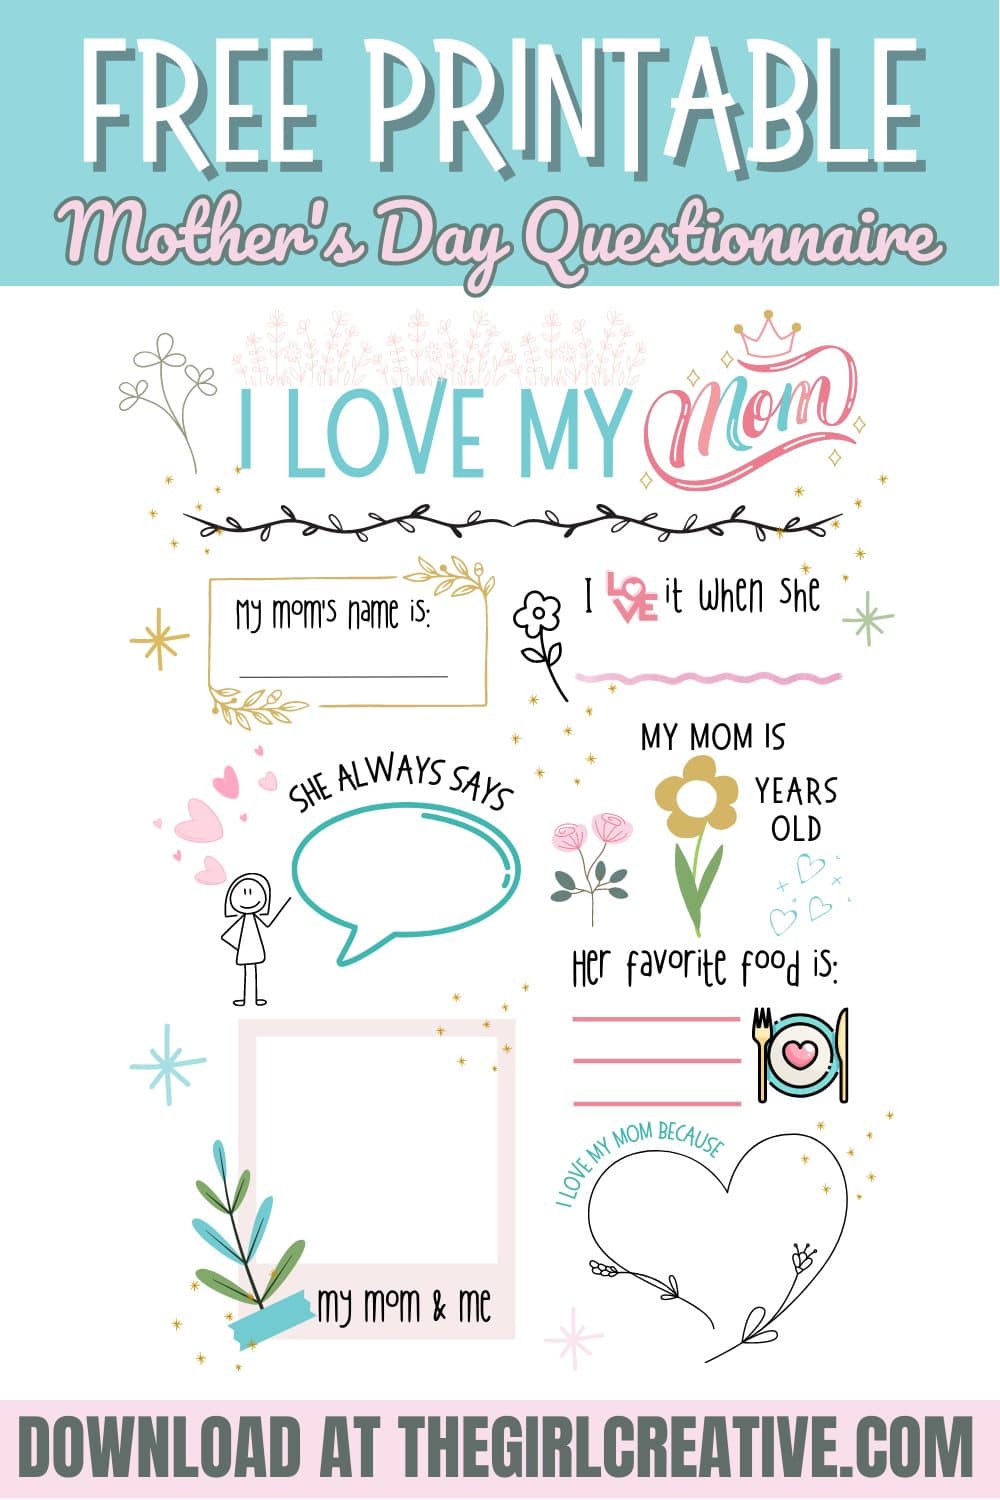 Free Printable Mothers Day Questionnaire